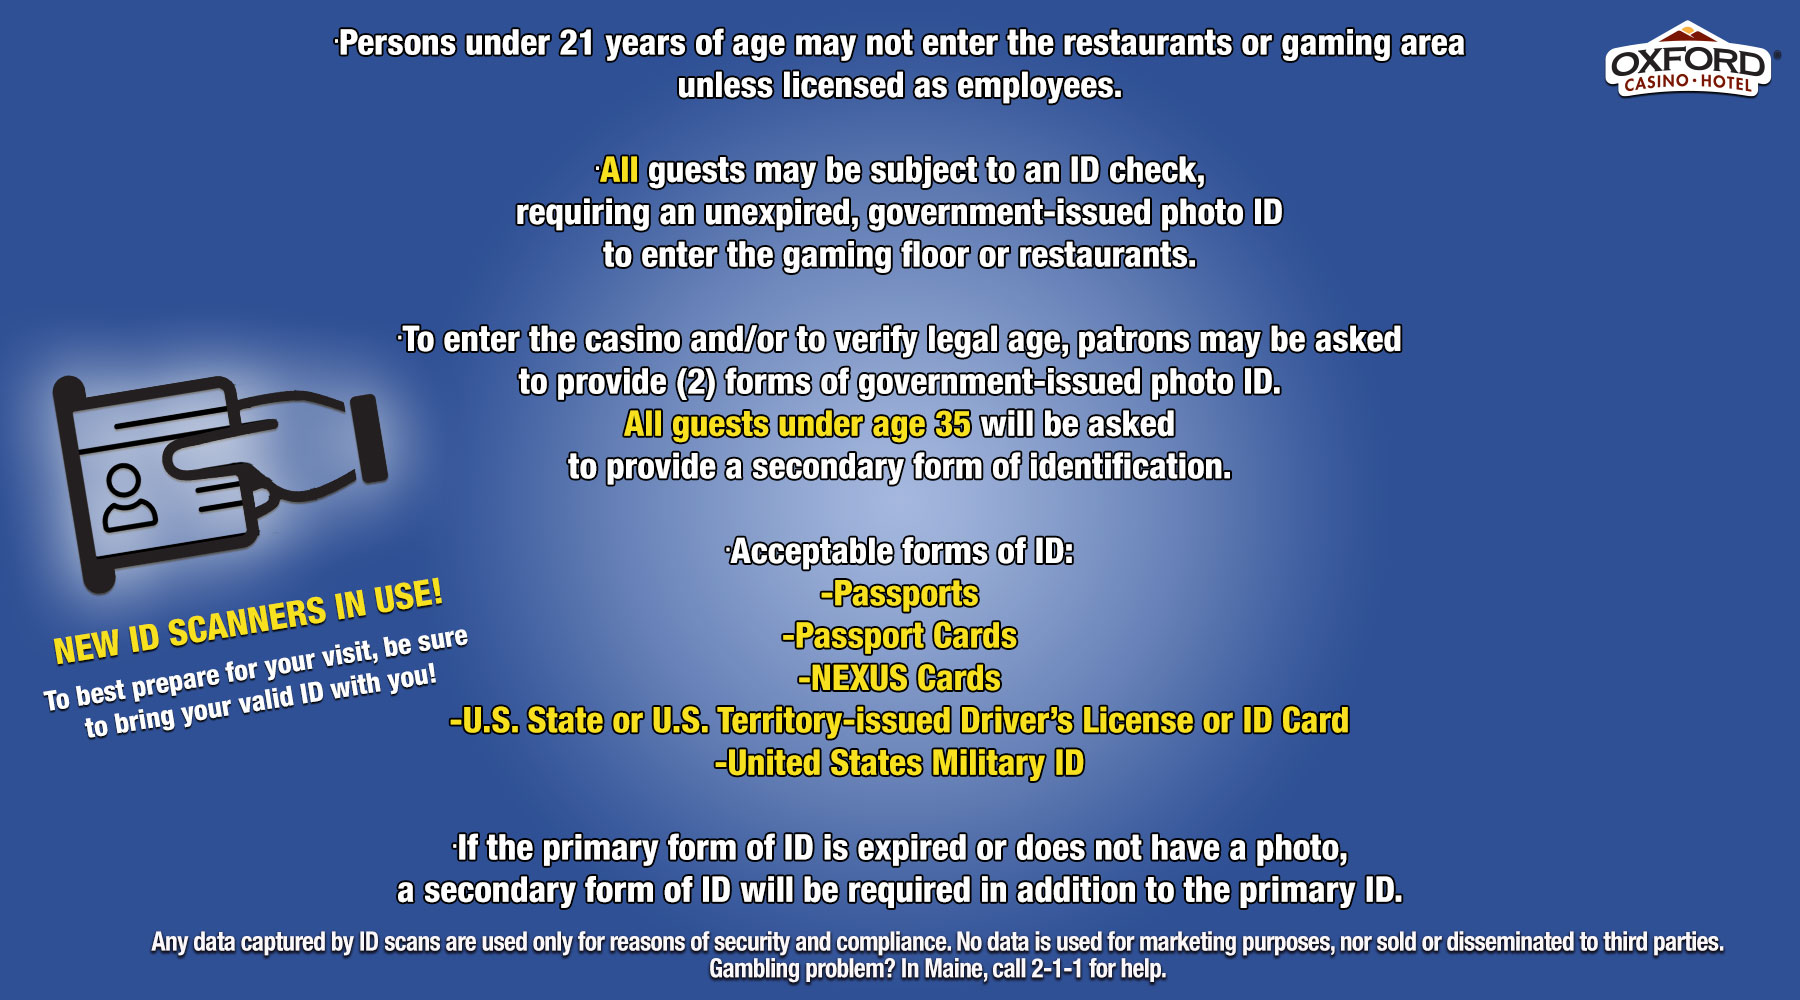 Plan your Visit - Have your ID! ID requirements for entry to Gaming floor and Restaurants - Oxford Casino Hotel